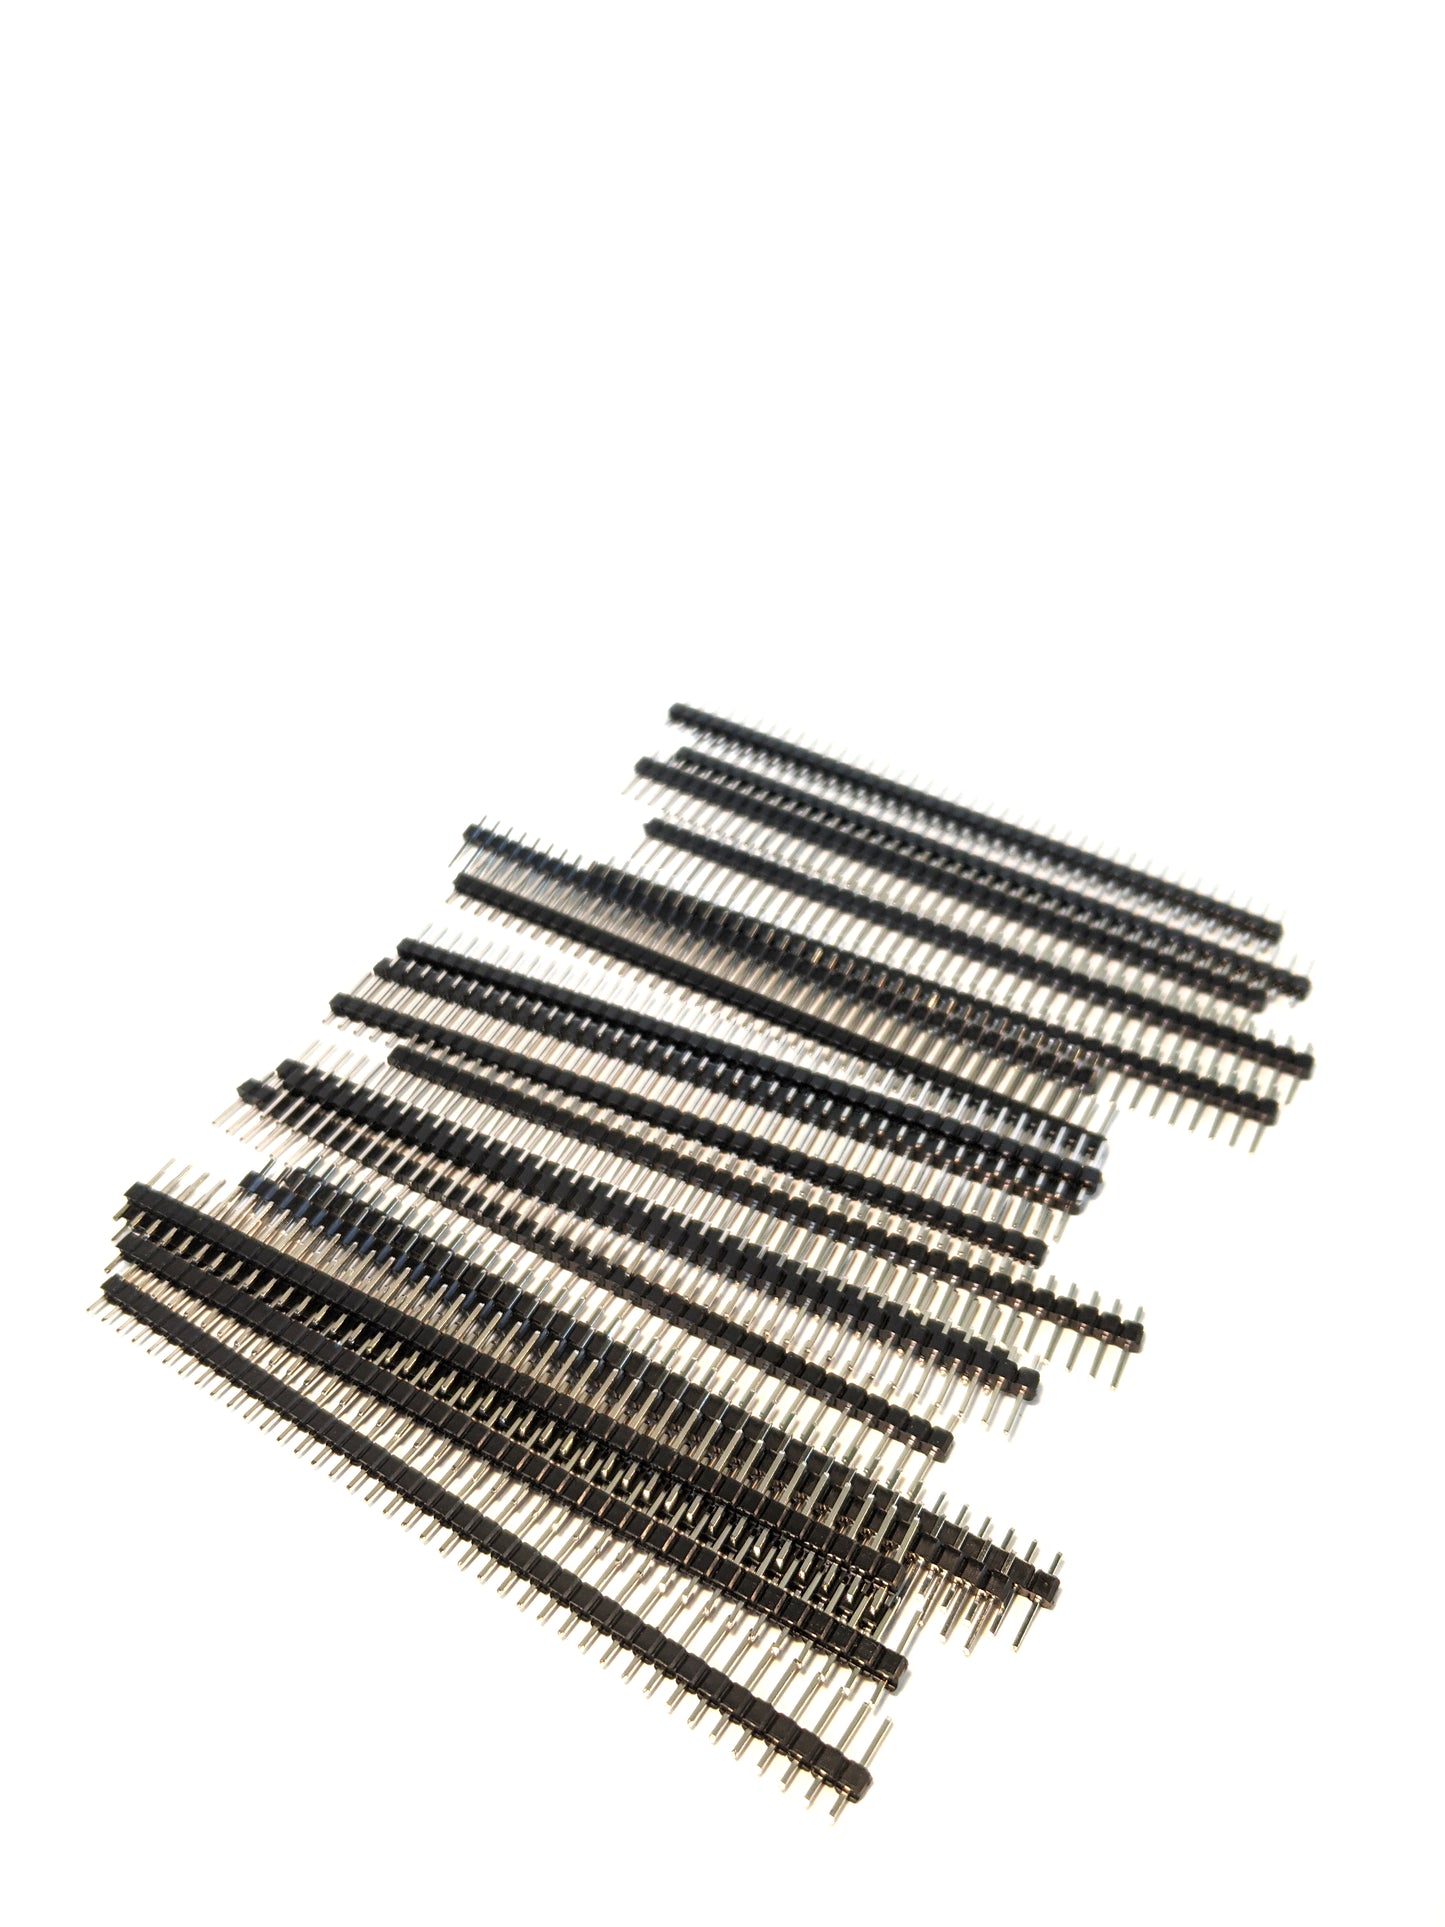 Male Header 2.54mm/0.1in Pitch Single Row Straight